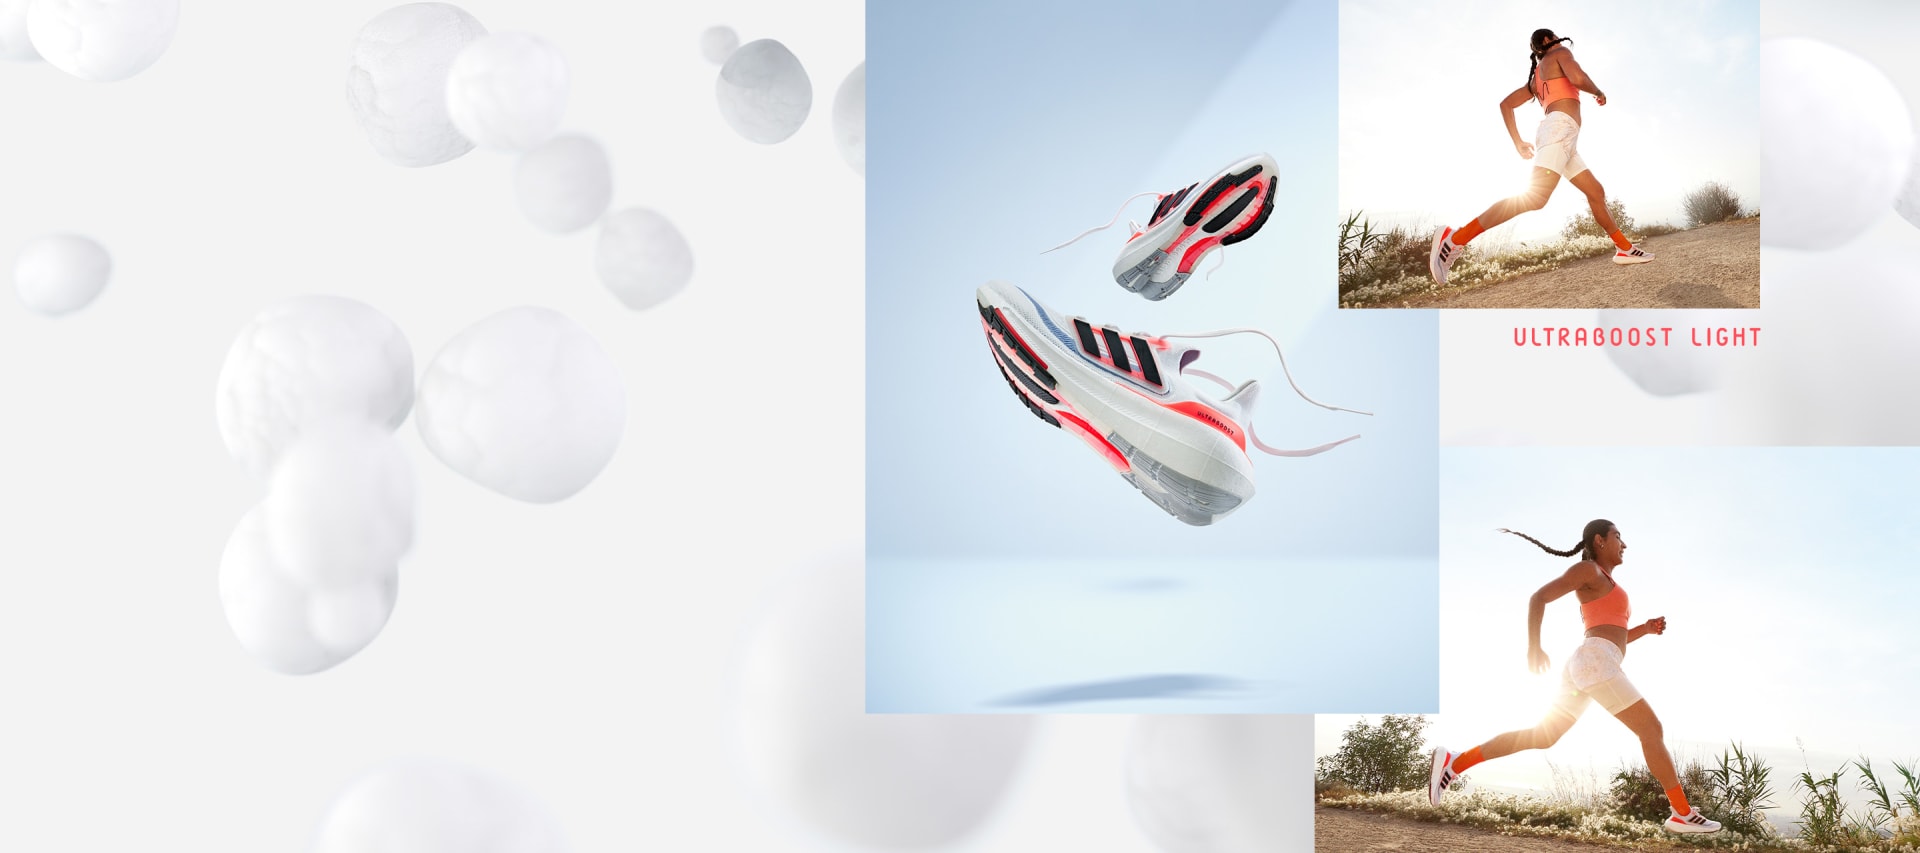 Image collage of woman running in Ultraboost Light shoes.